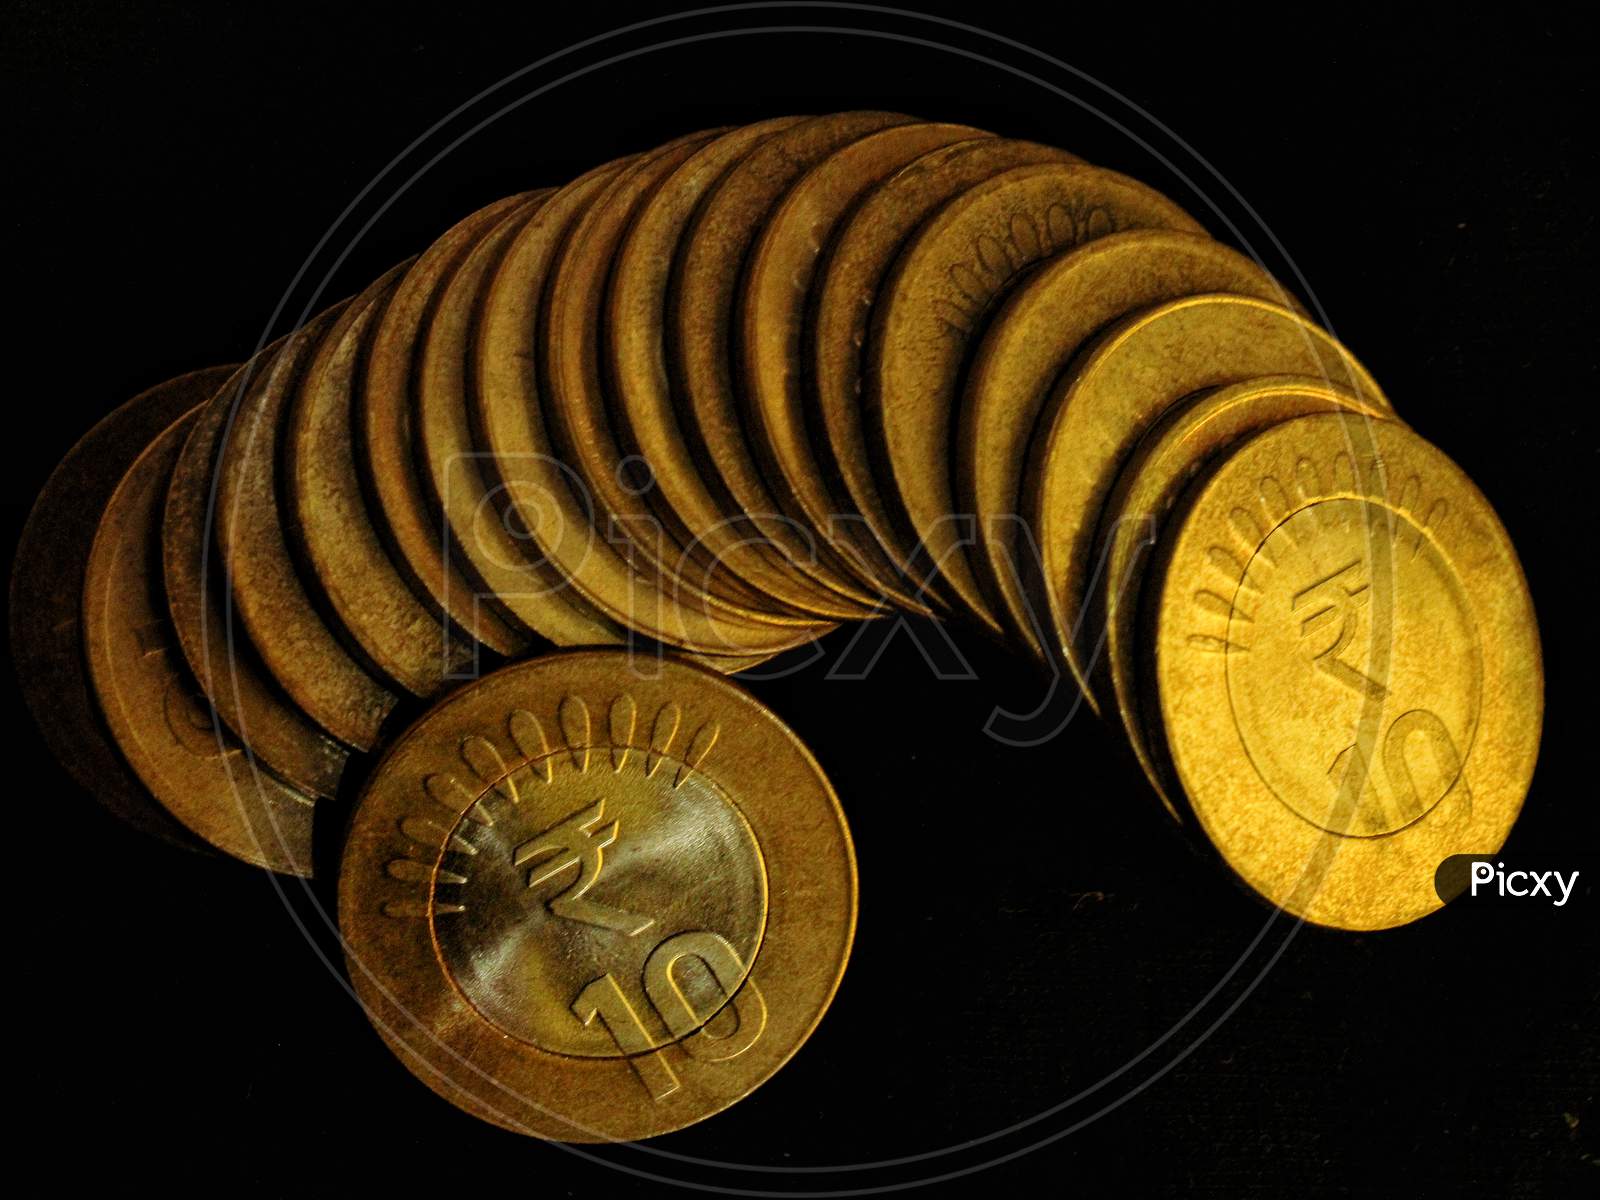 Indian 10 rupee coins with black background